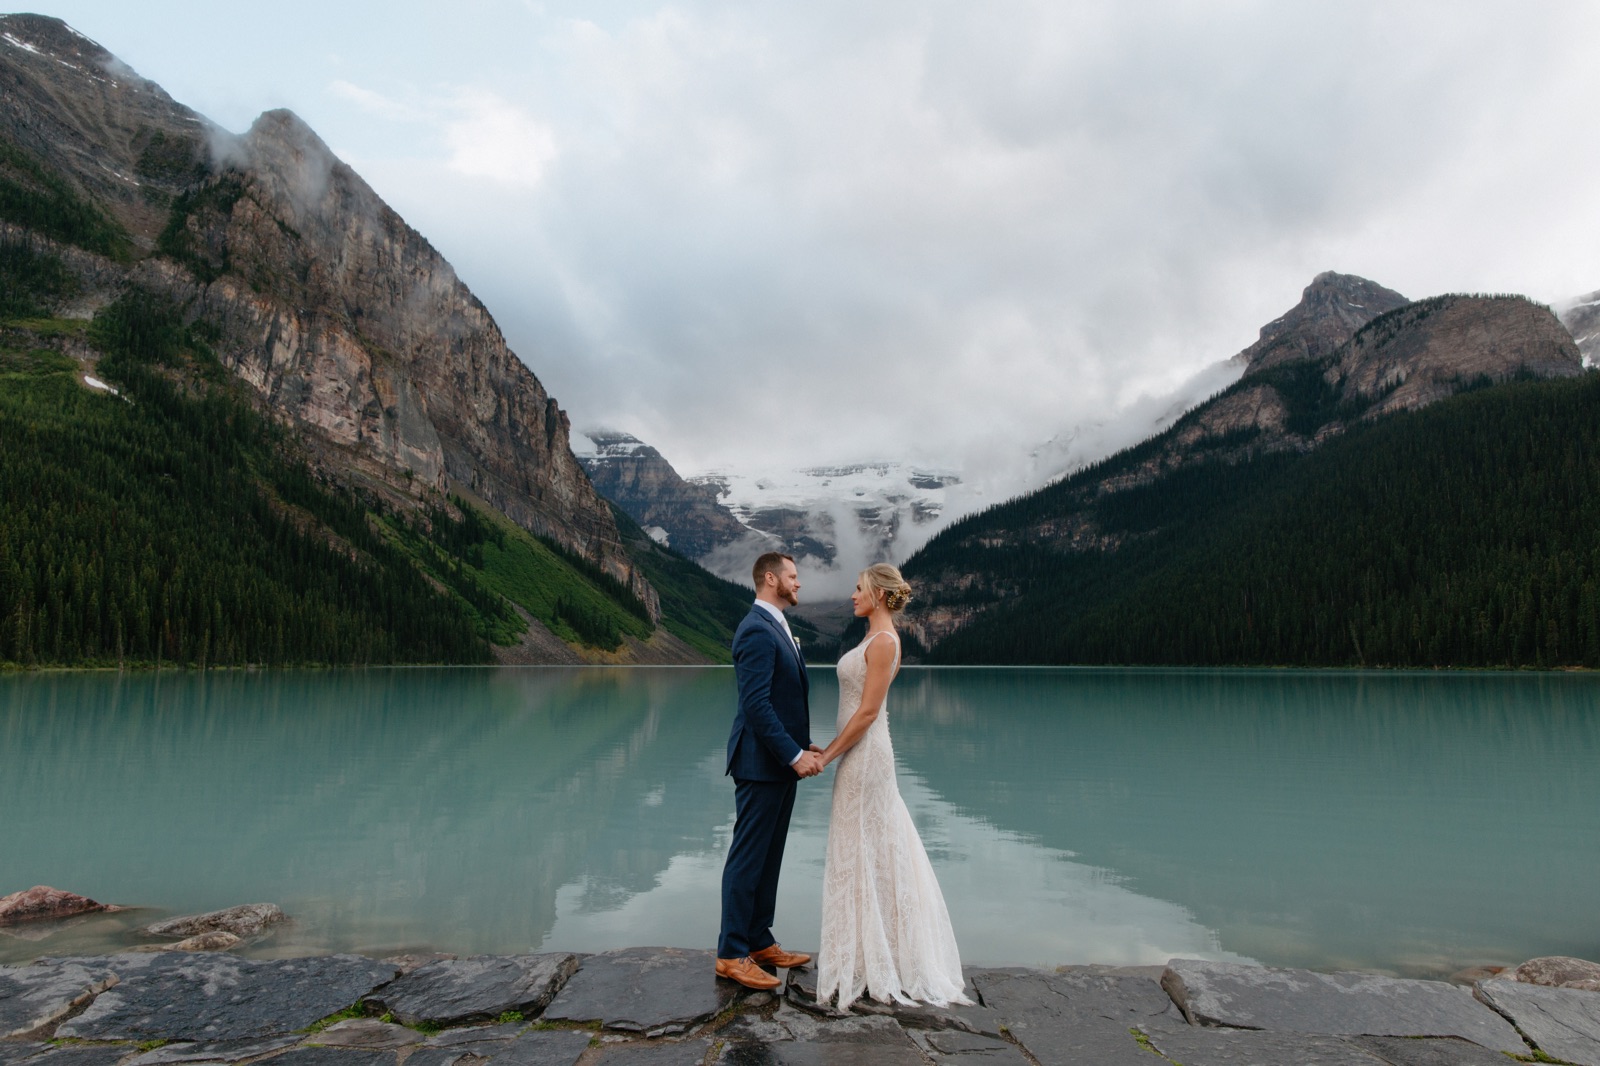 Wedding portraits on the steps at Lake Louise overlooking the Victoria Glacier